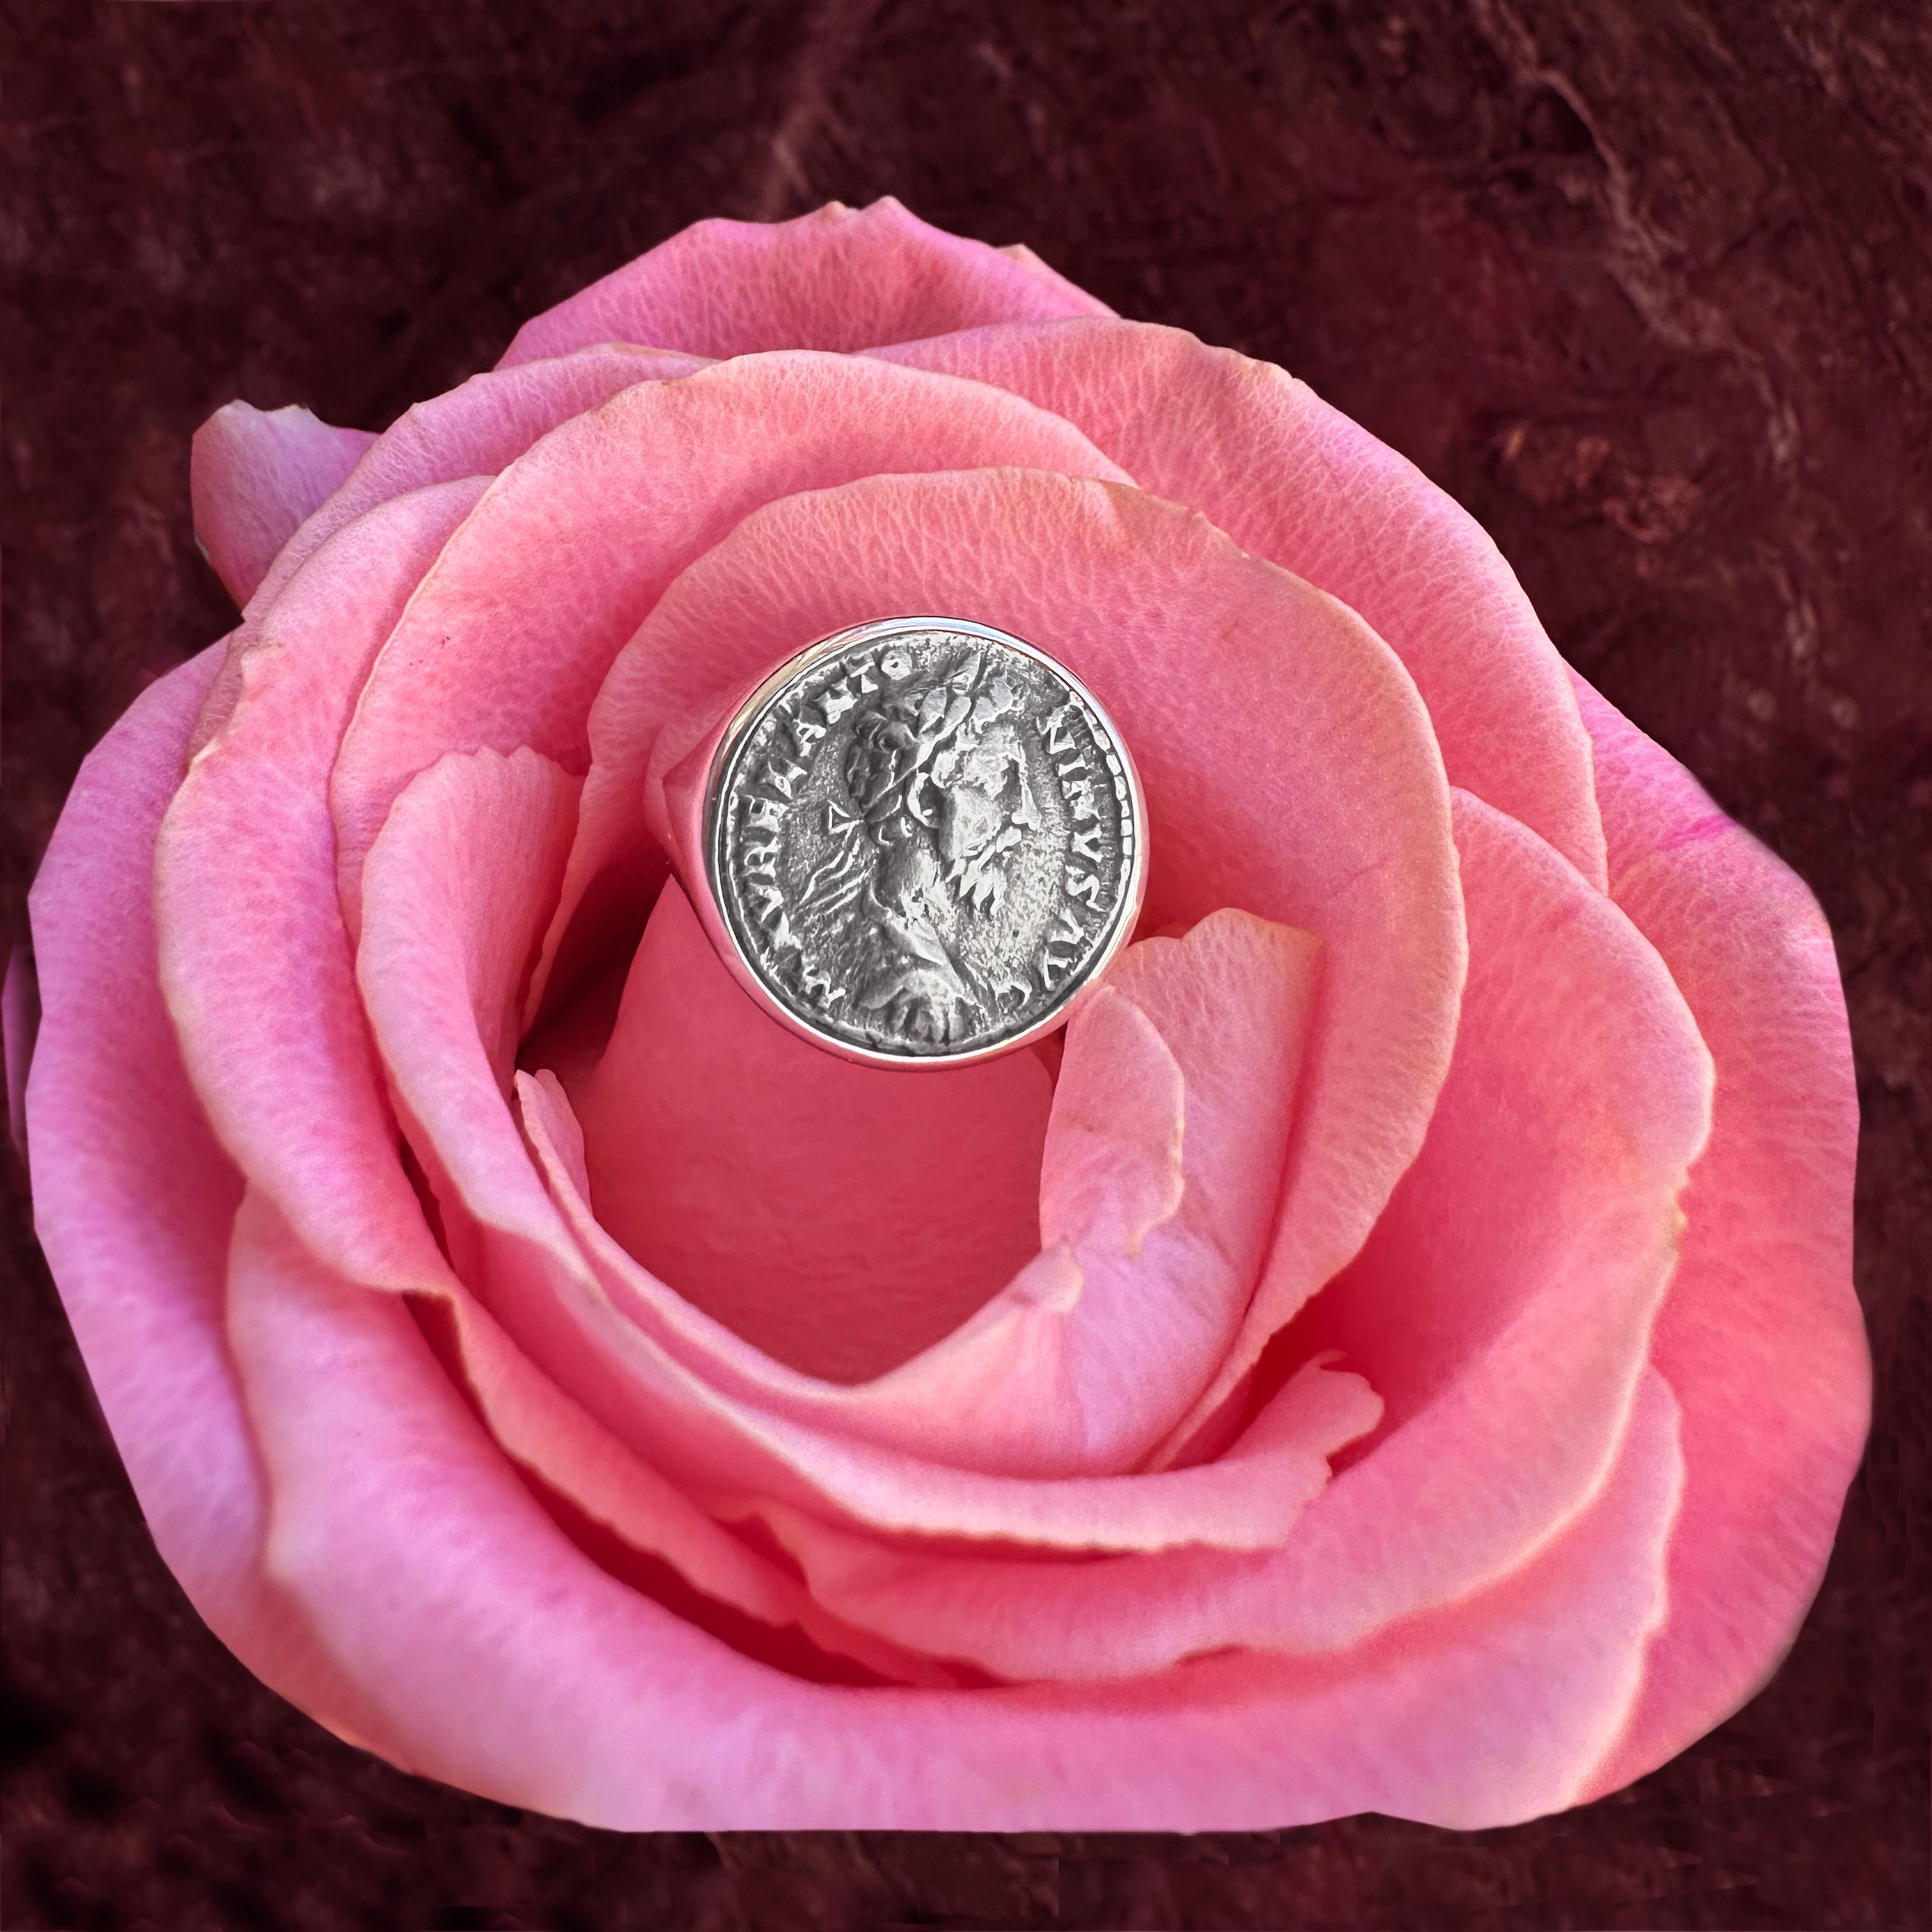 This exquisite coin ring features an original Roman coin dating back to the 2nd century AD, showcasing Emperor Marcus Aurelius. The coin's reverse side displays a depiction of Goddess Fortune.

Marcus Aurelius, renowned as both a Roman emperor and a